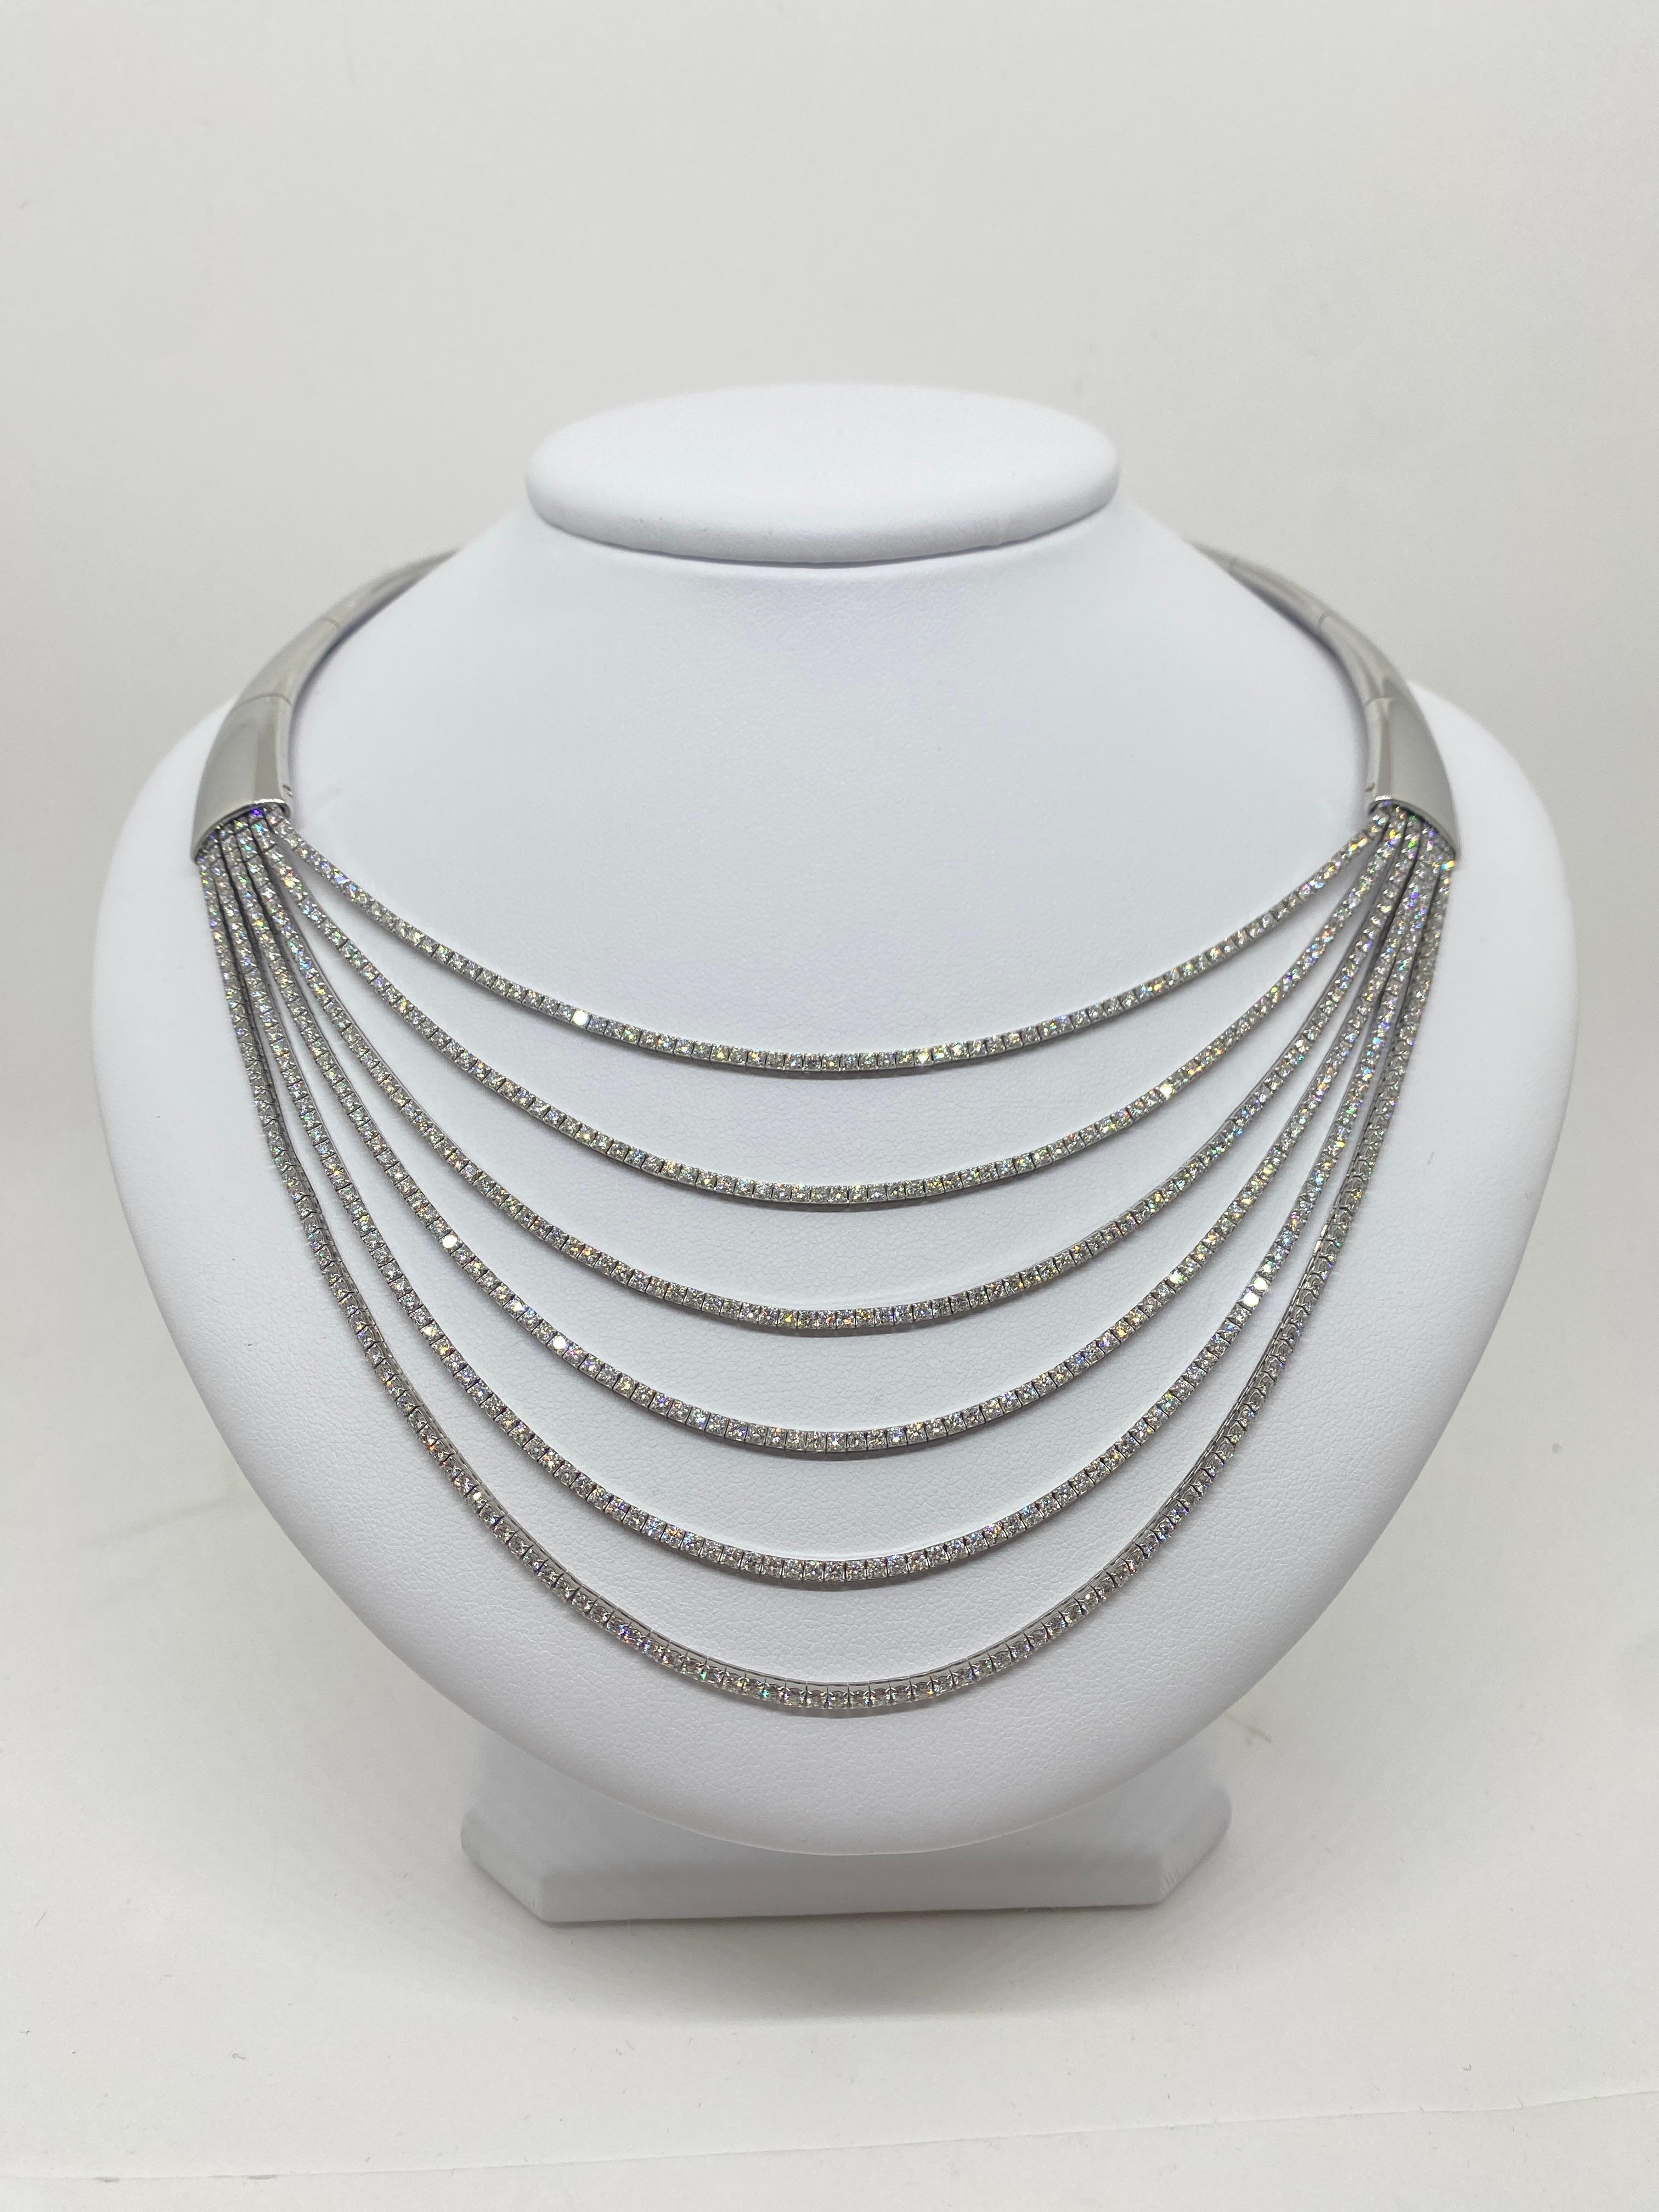 Mattia Cielo signed necklace made of 18kt white gold with natural brilliant-cut diamonds for 12.85 ct.

Welcome to our jewelry collection, where every piece tells a story of timeless elegance and unparalleled craftsmanship. As a family-run business